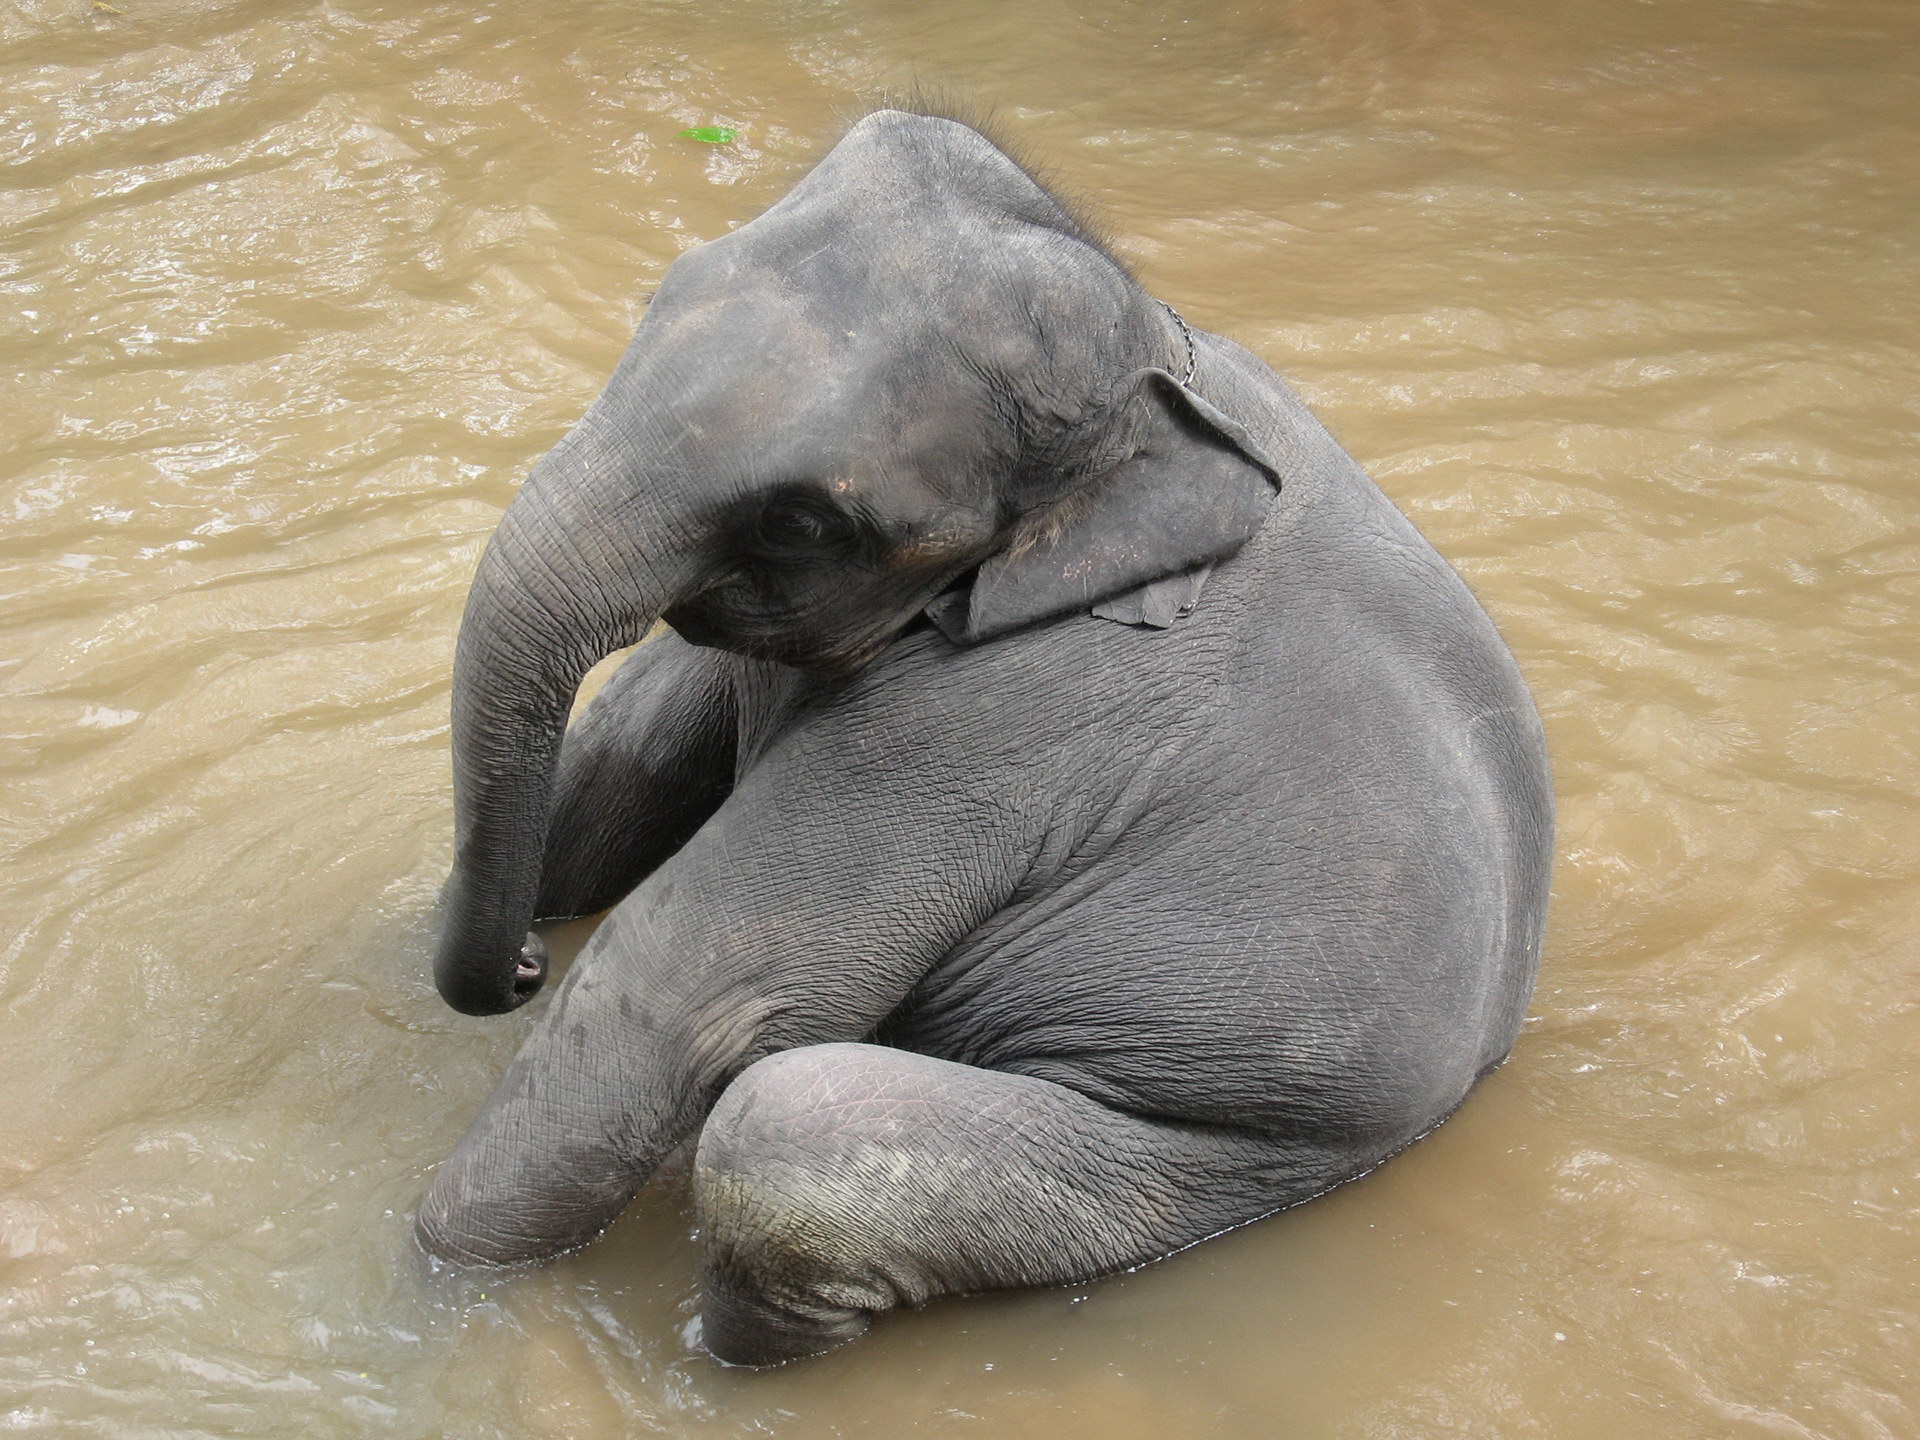 The baby elephant sat in the water